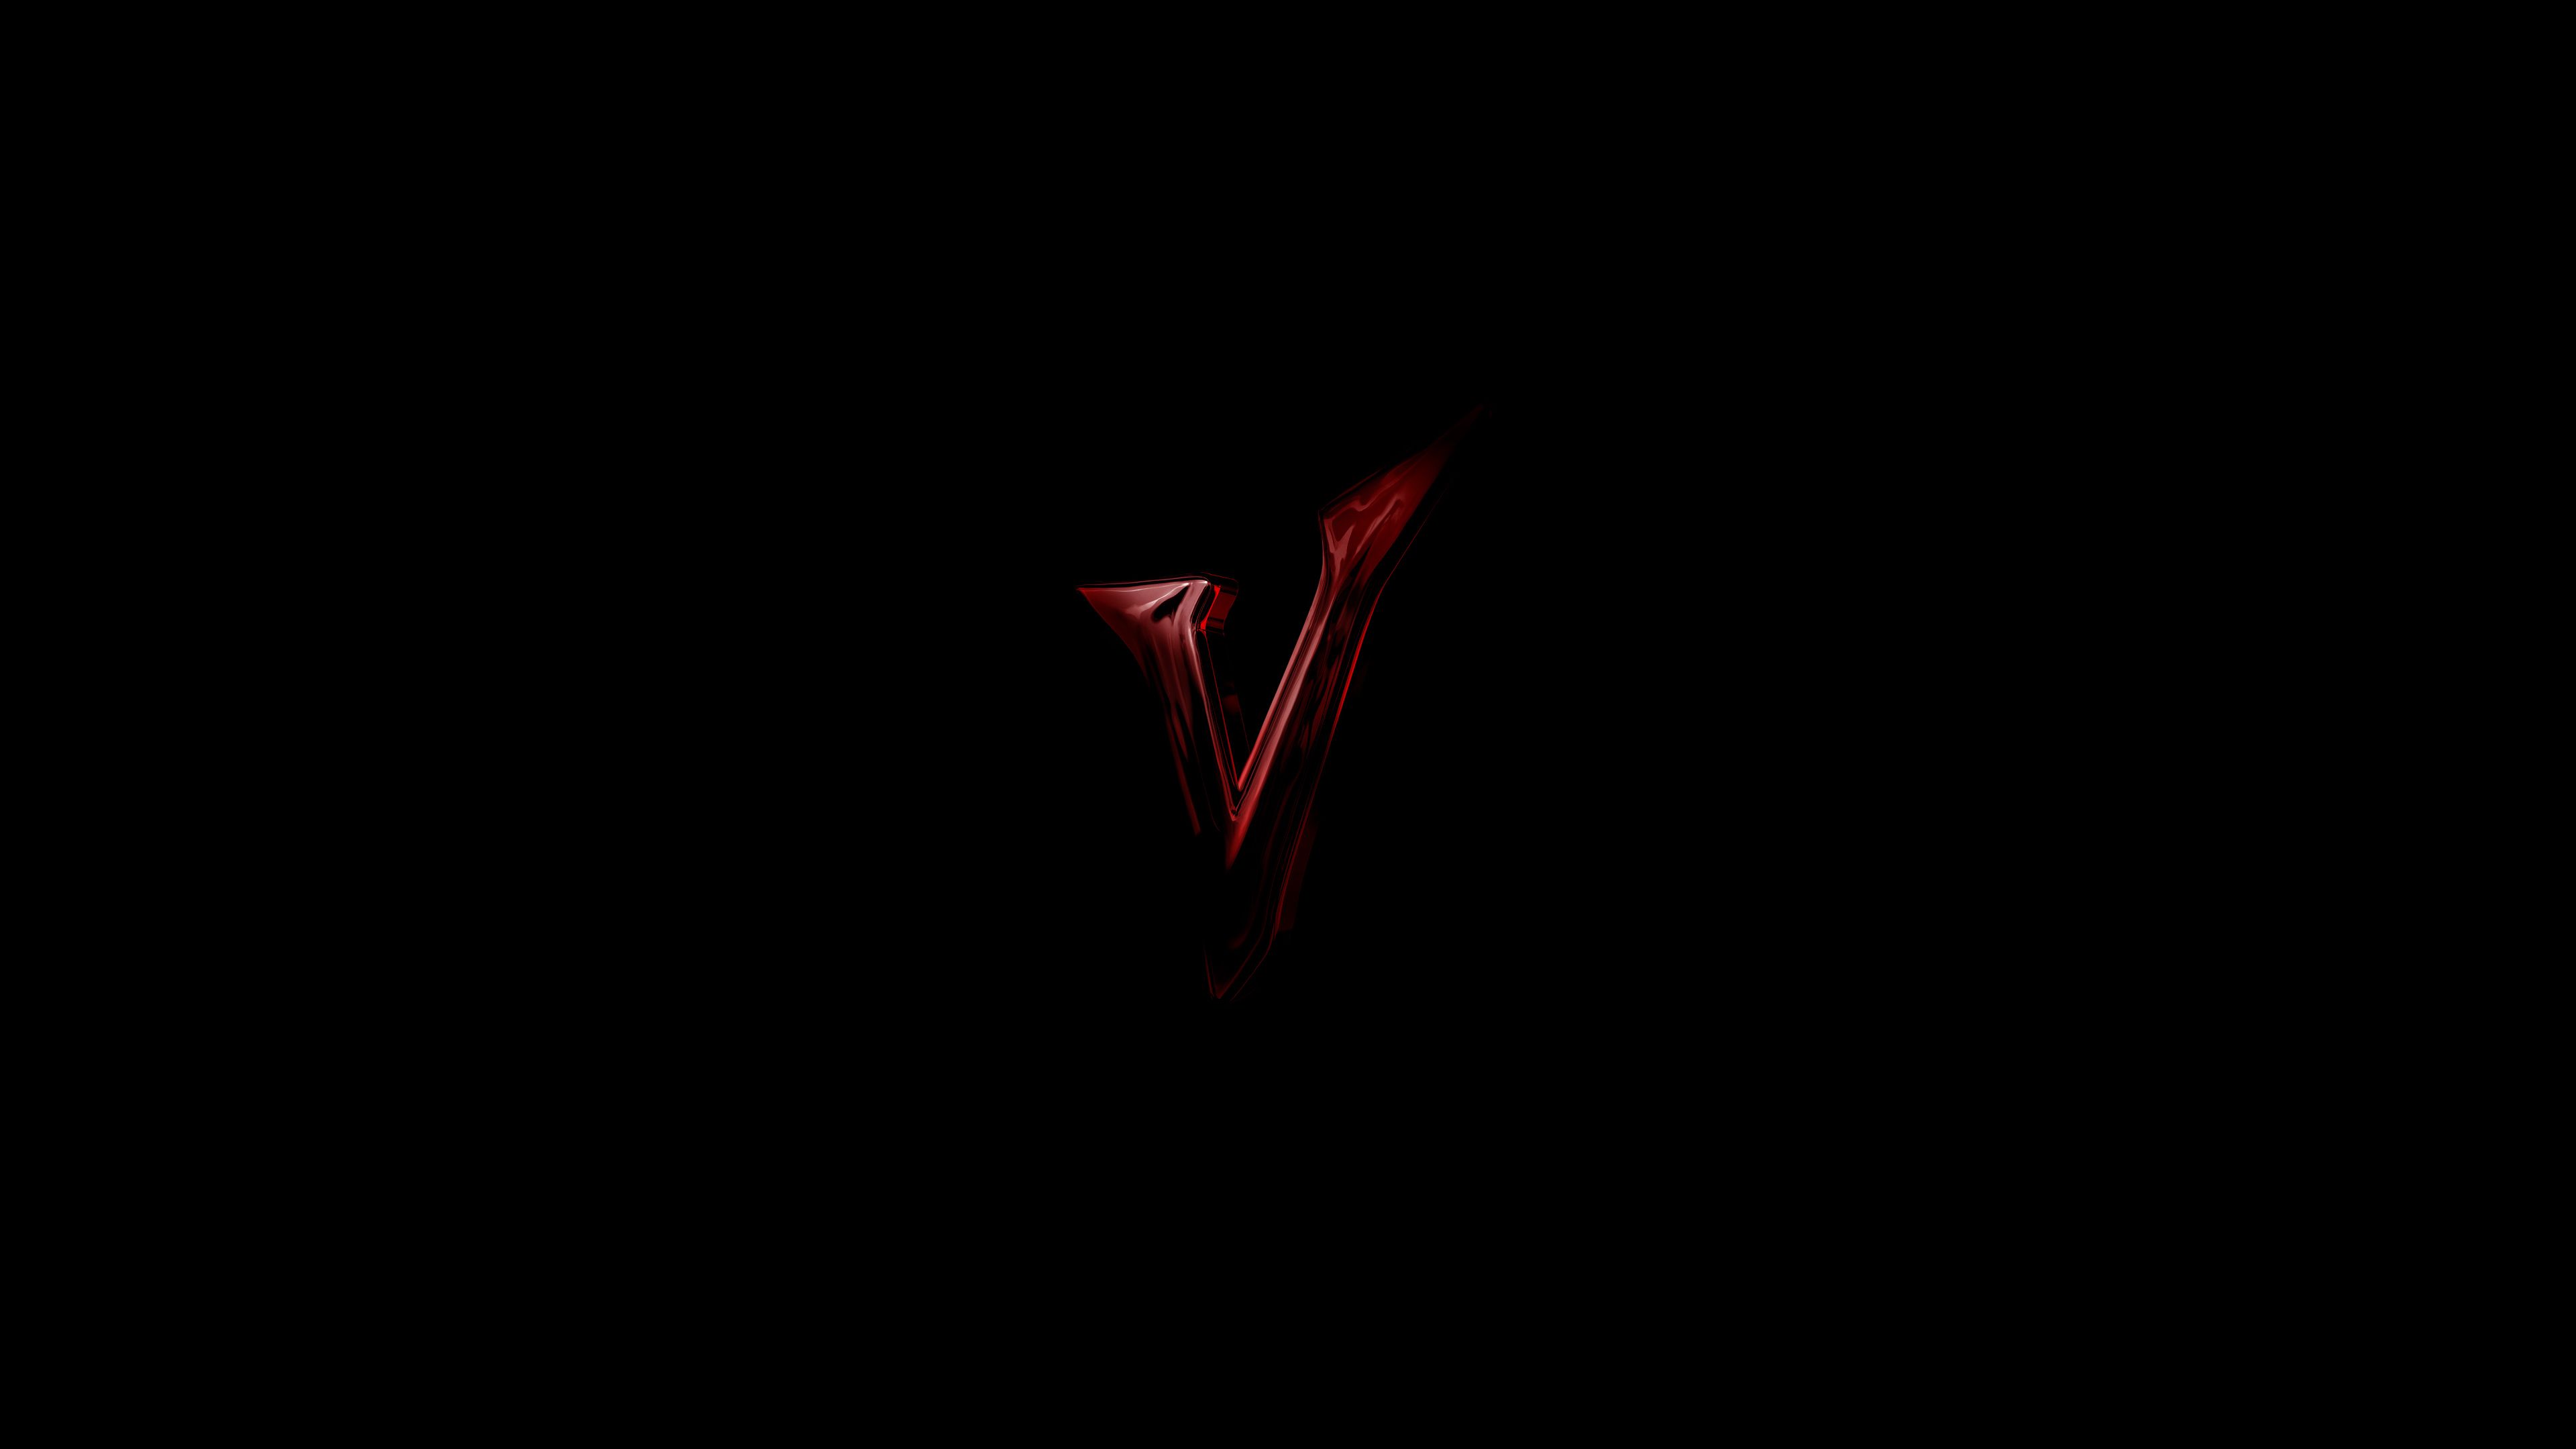 1366x768 Venom Let There Be Carnage Logo 1366x768 Resolution HD 4k Wallpapers, Image, Backgrounds, Photos and Pictures